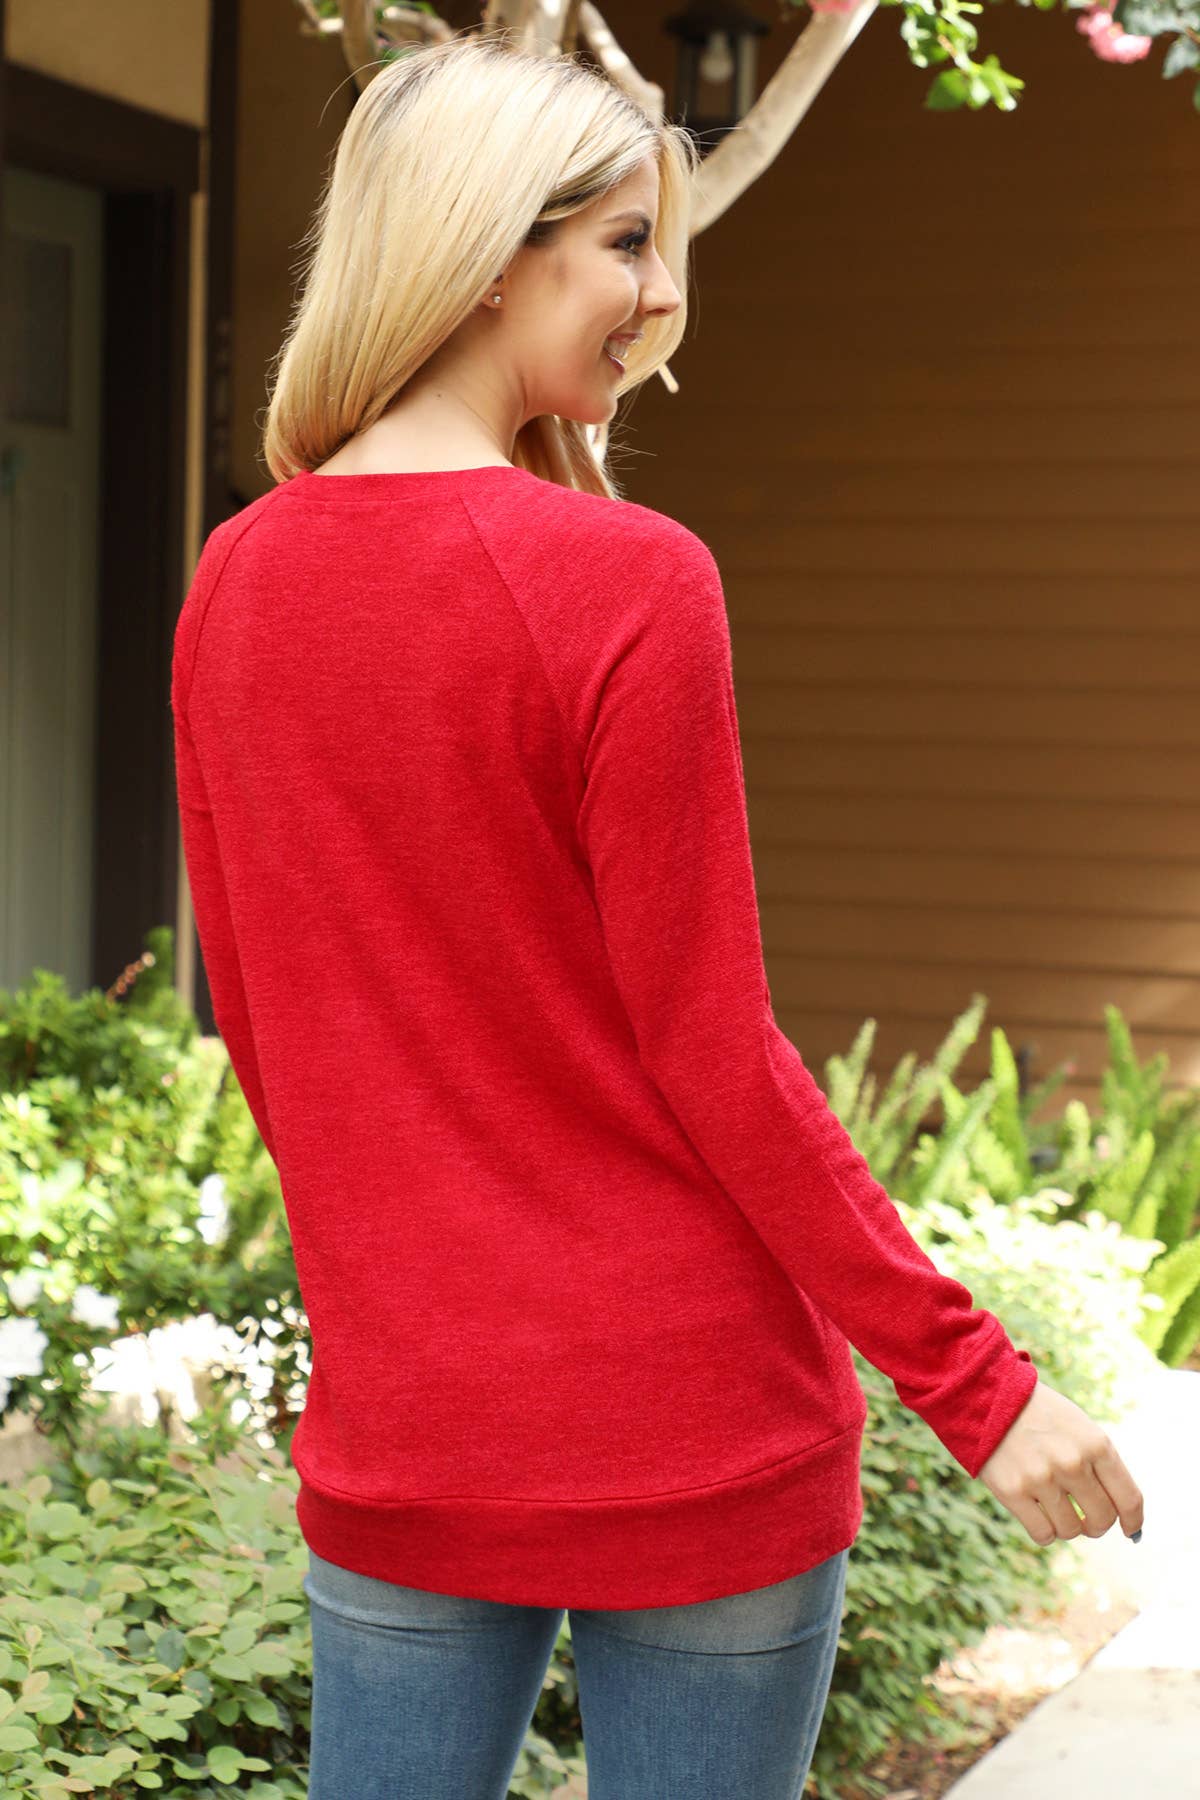 YMT20078XV-PLUS SIZE KNIT FRONT POCKET LONG SLEEVED TOP: (3X) / Rust